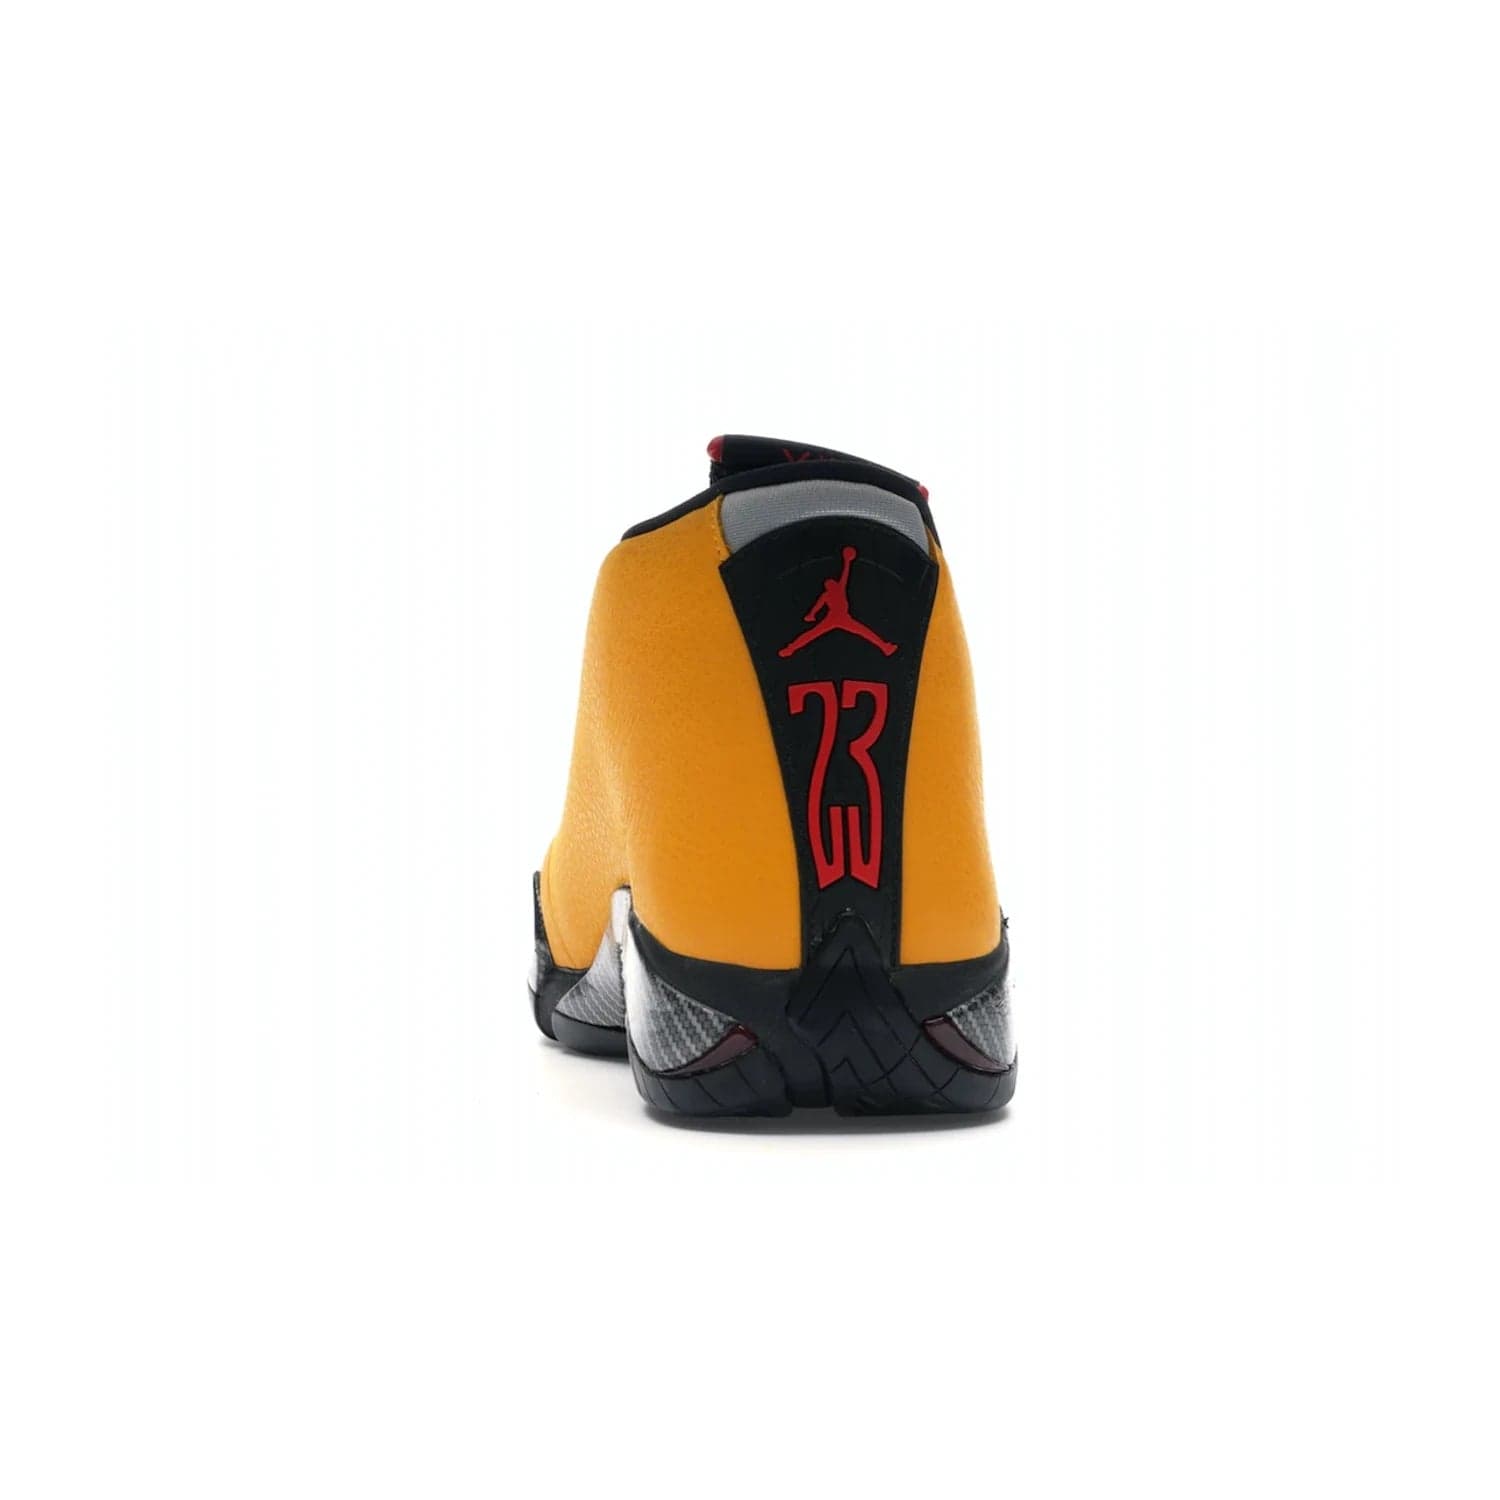 Jordan 14 Retro University Gold - Image 27 - Only at www.BallersClubKickz.com - Air Jordan 14 Retro University Gold: High-quality leather sneaker with Jumpman, tongue & heel logos. Zoom Air units & herringbone traction for superior comfort. University Gold outsole for stylish streetwear.